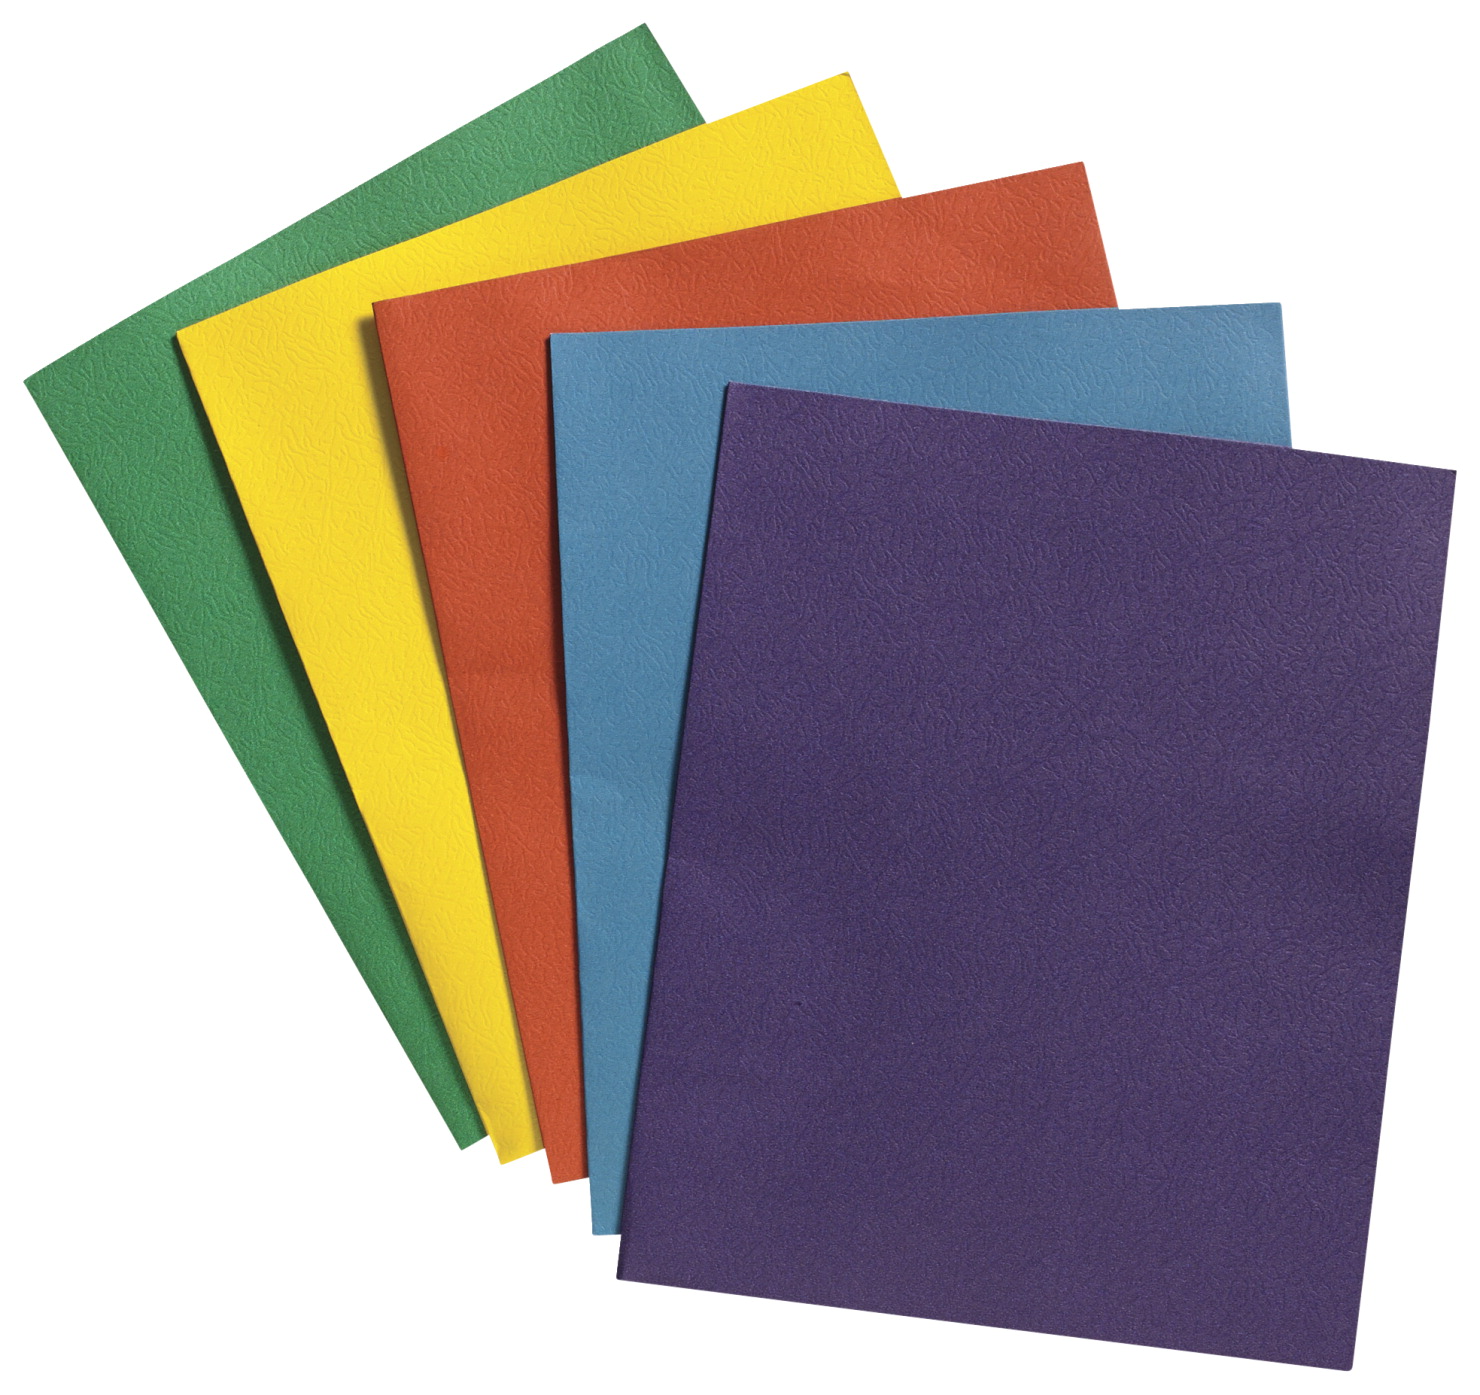 Three-Color Stone Manufacture Ltd School Smart Extra Large 2-Pocket Folder, Assorted Colors, Pack of 25